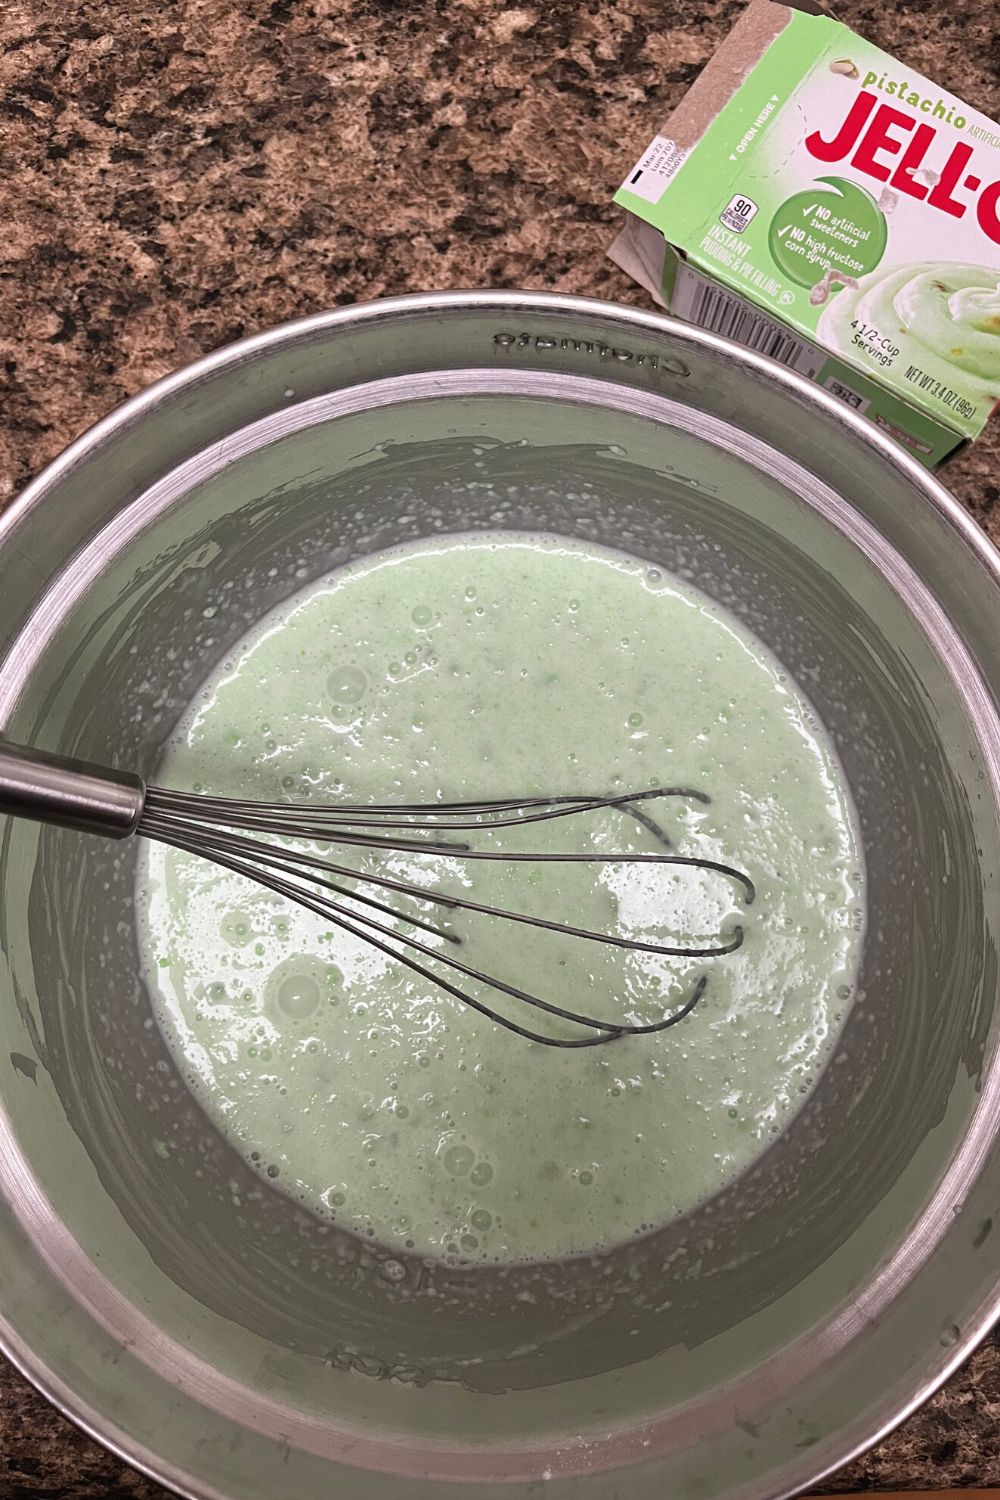 pistachio pudding mix being dissolved in milk and heavy whipping cream